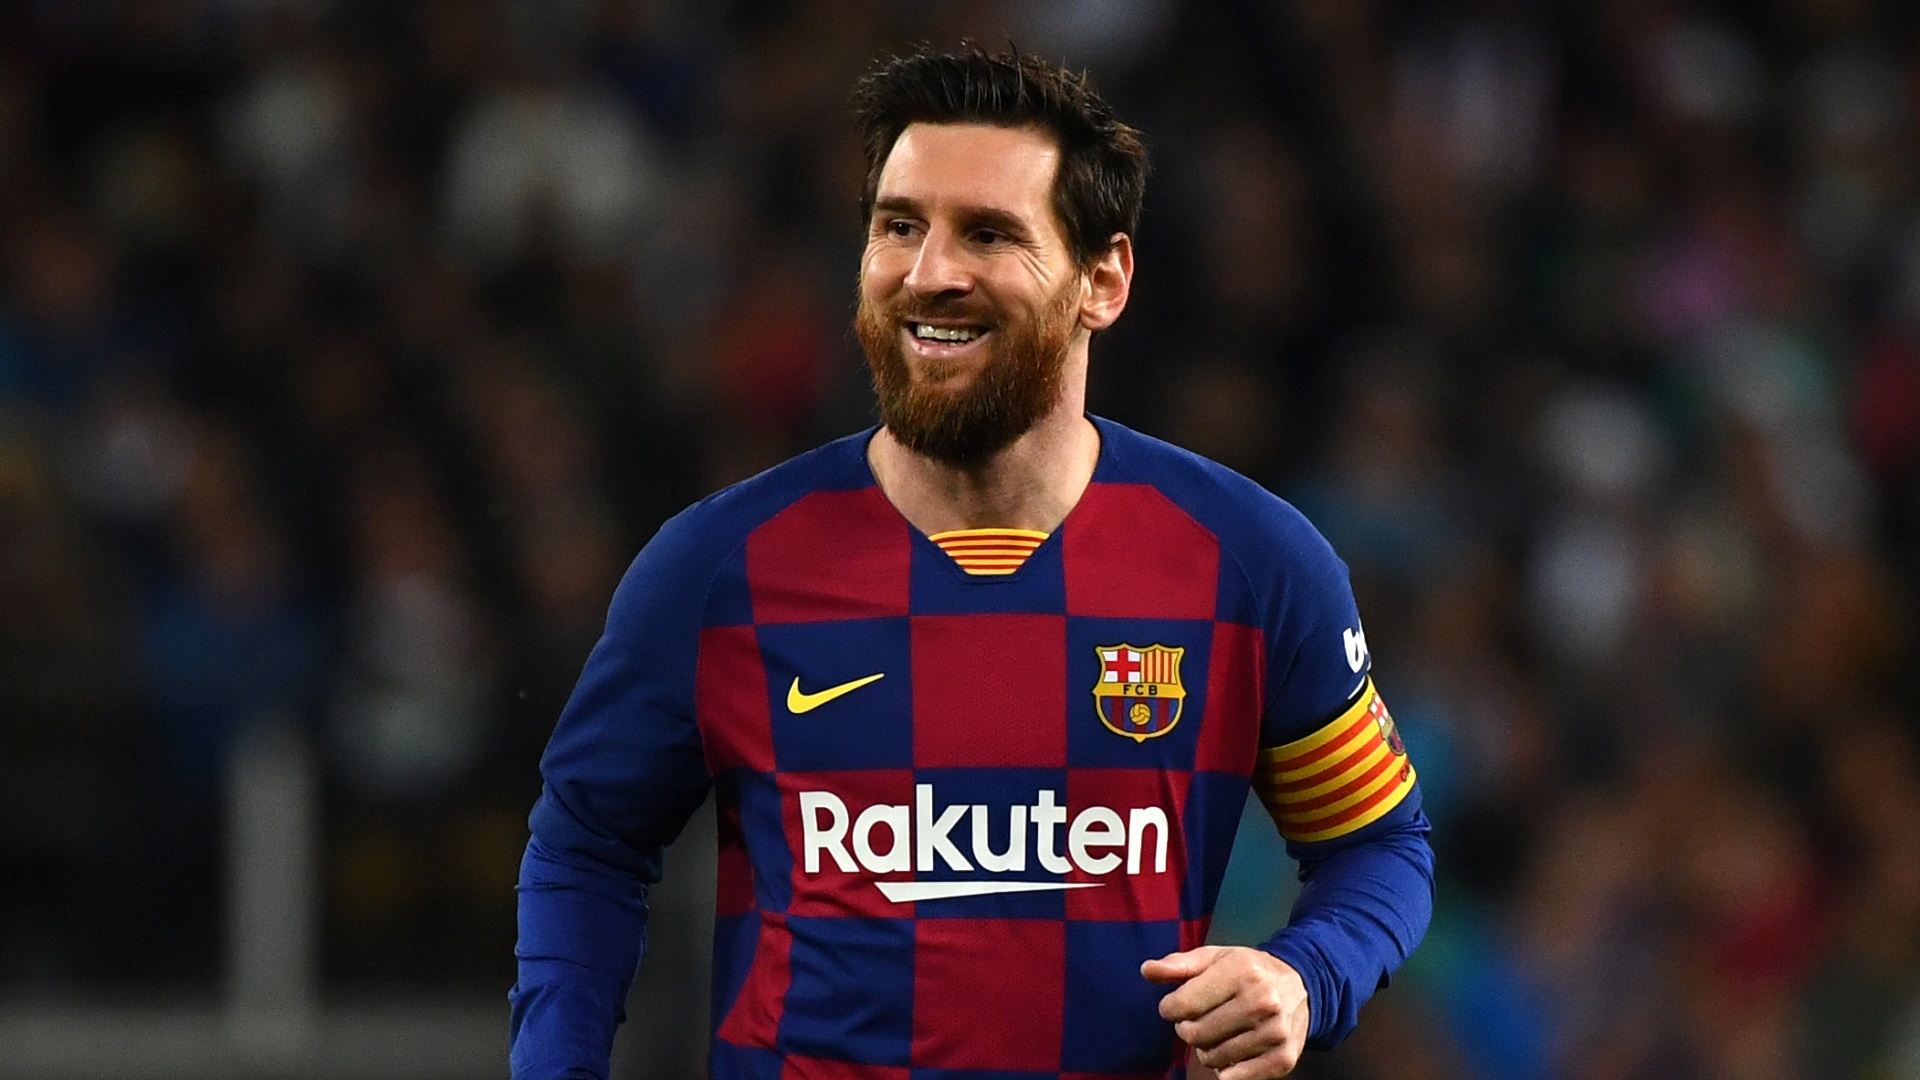 'We want the best in this league' - Zidane wants Messi to stay at Barcelona amid transfer rumours